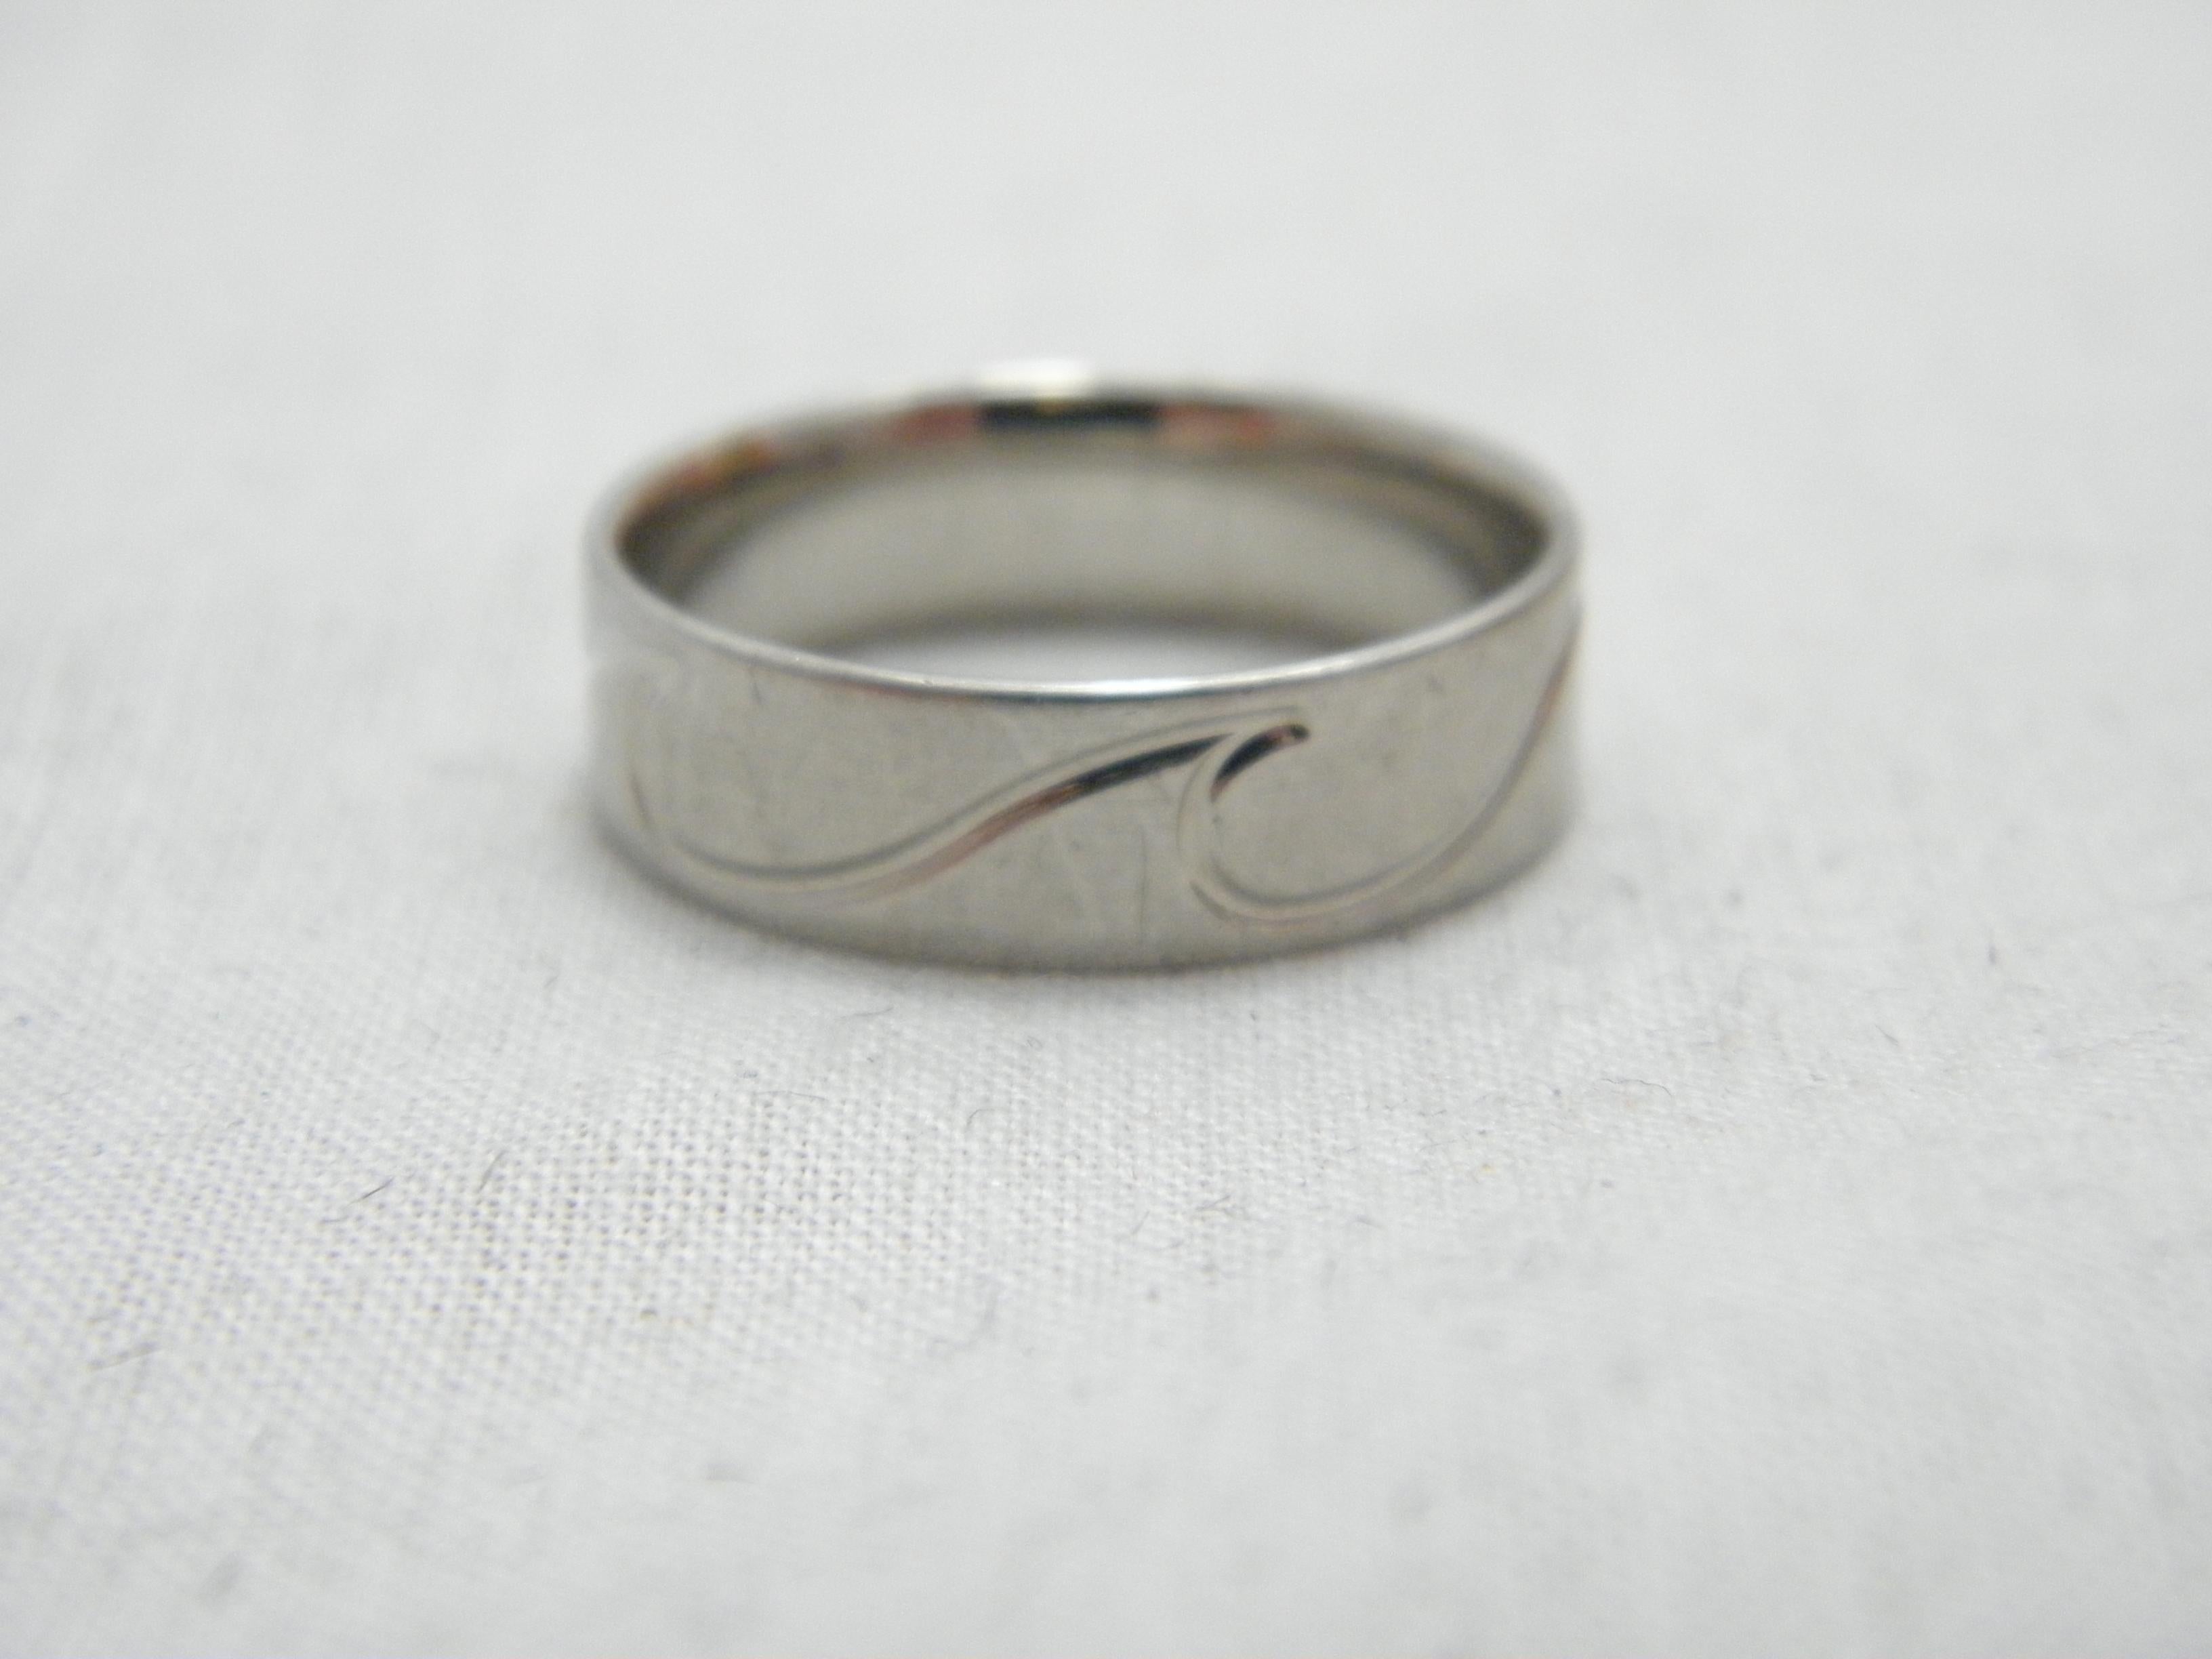 Vintage Tiffany Palladium 6.2mm Wave Ring Size Q1/2 8.5 950 Purity Band T&Co In Good Condition For Sale In Camelford, GB